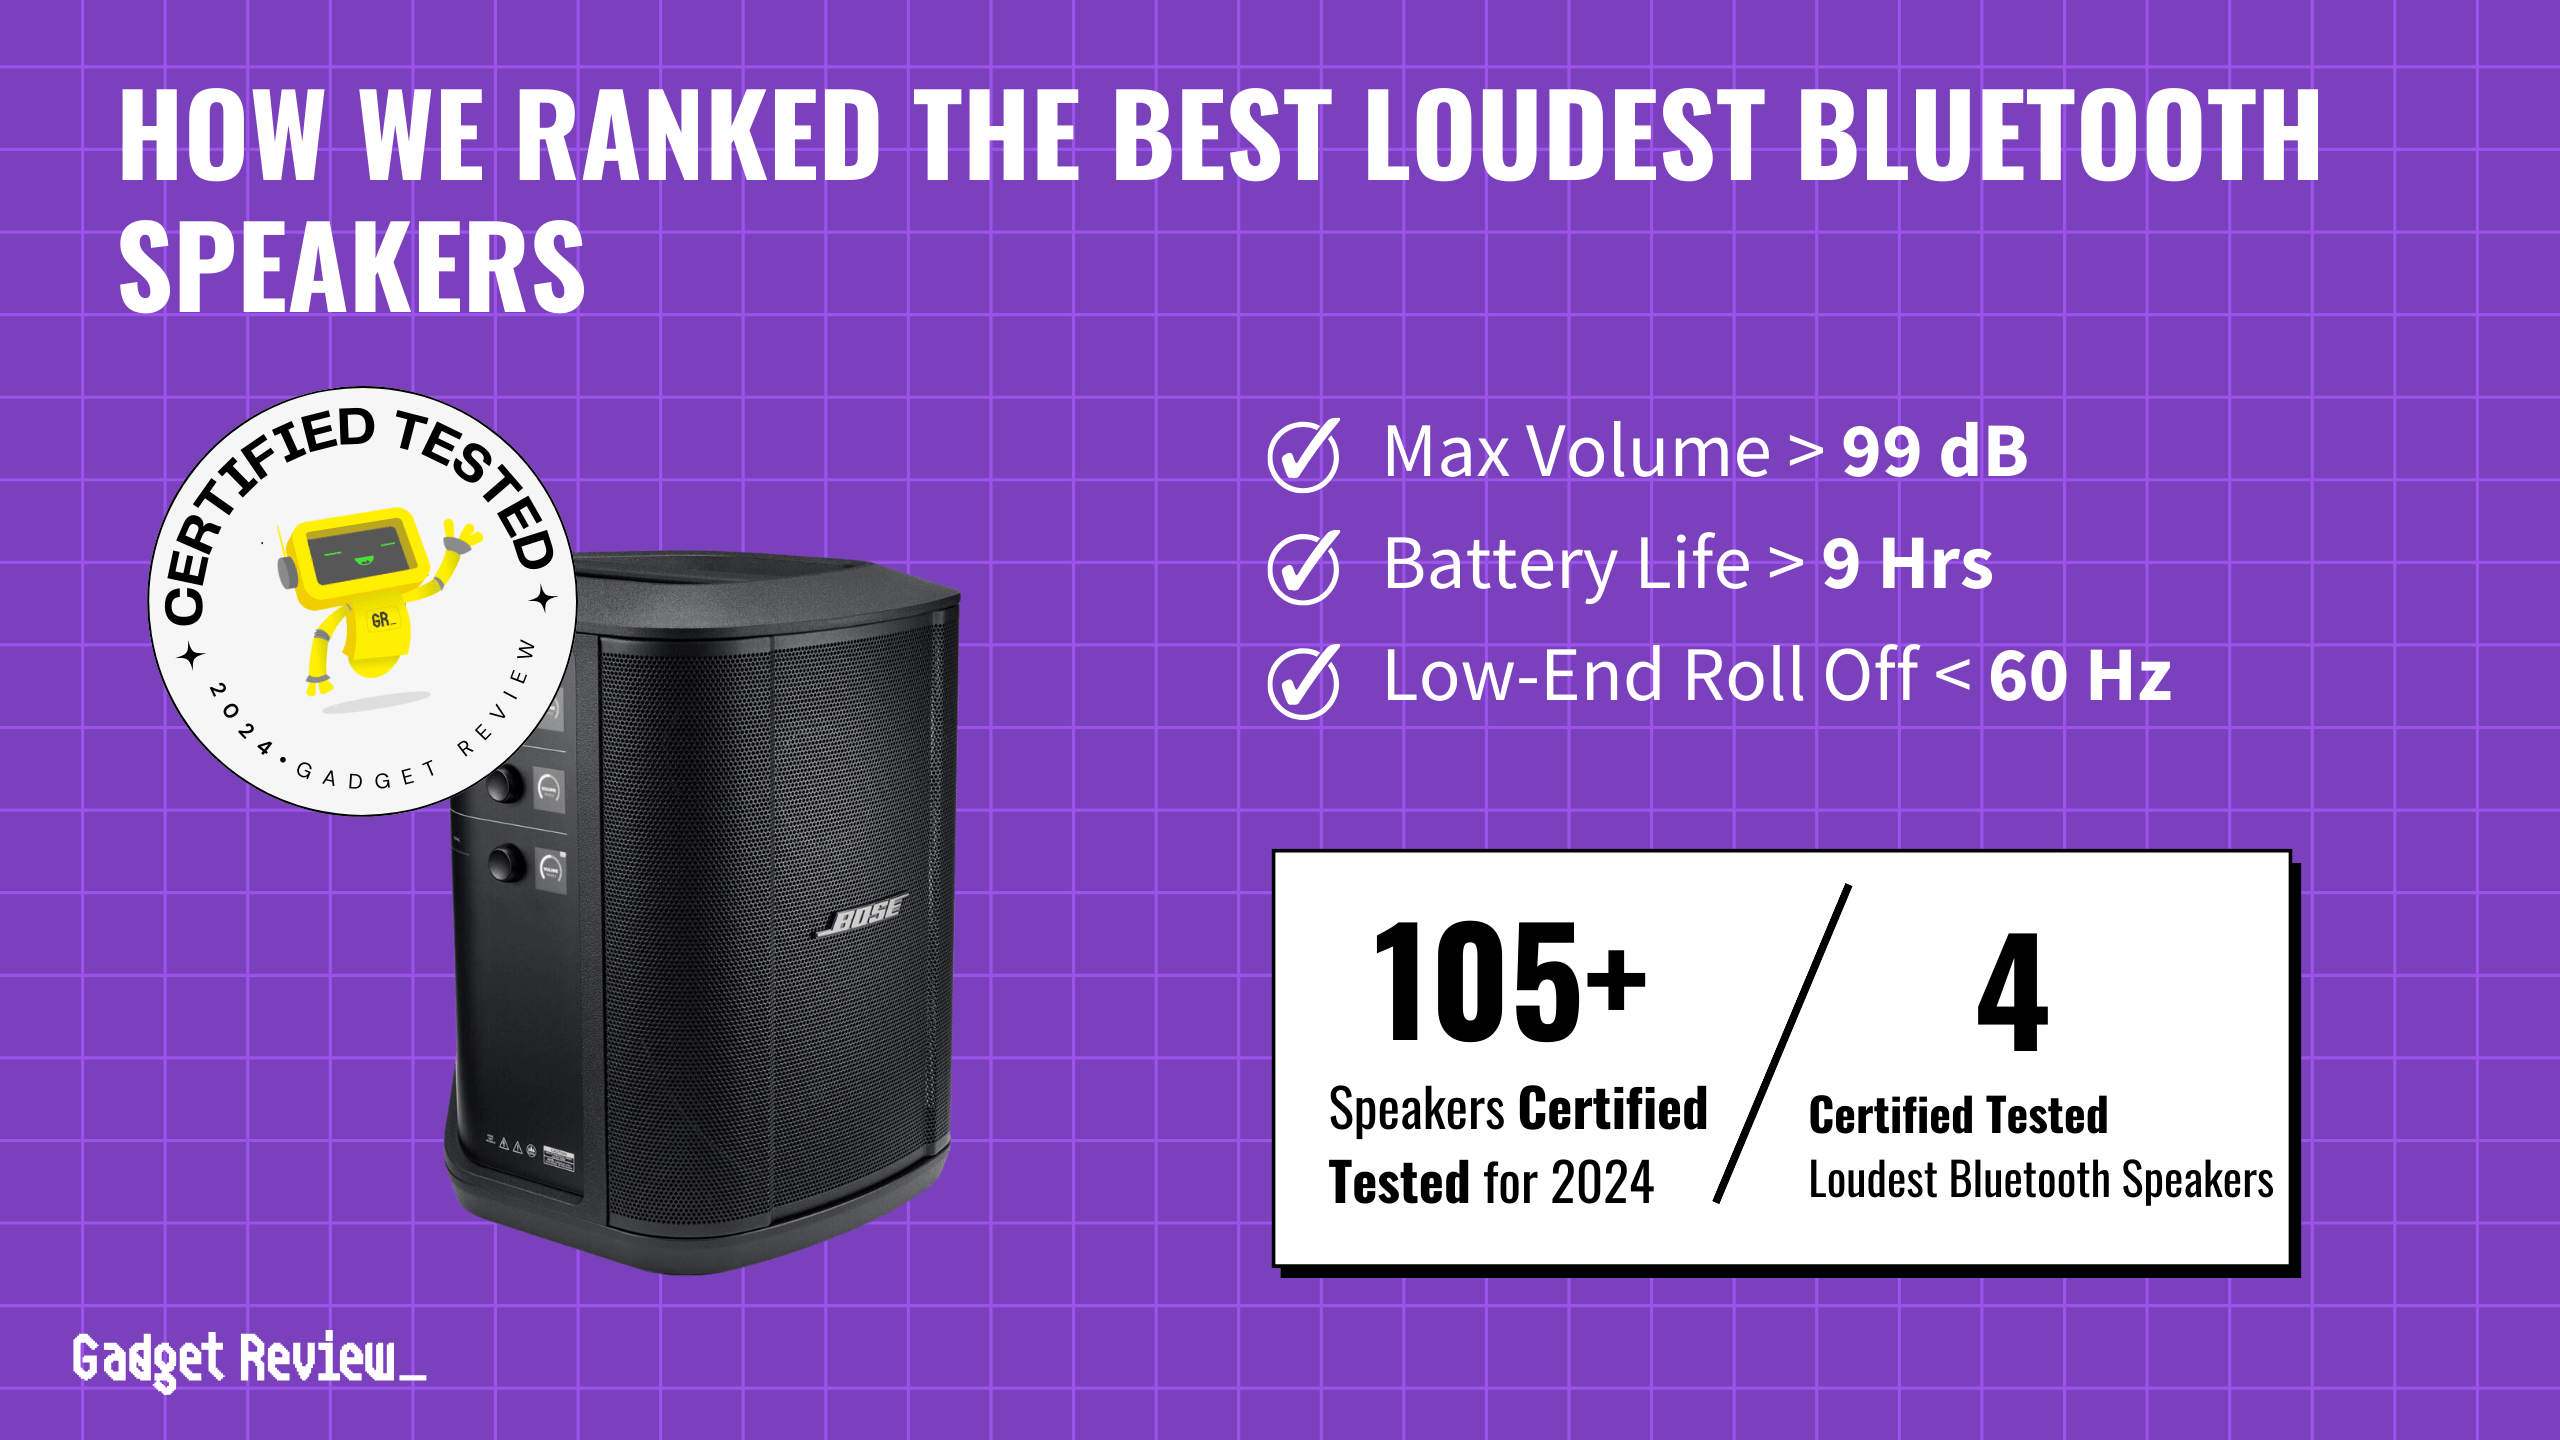 loudest bluetooth speaker guide that shows the top best bluetooth speaker model